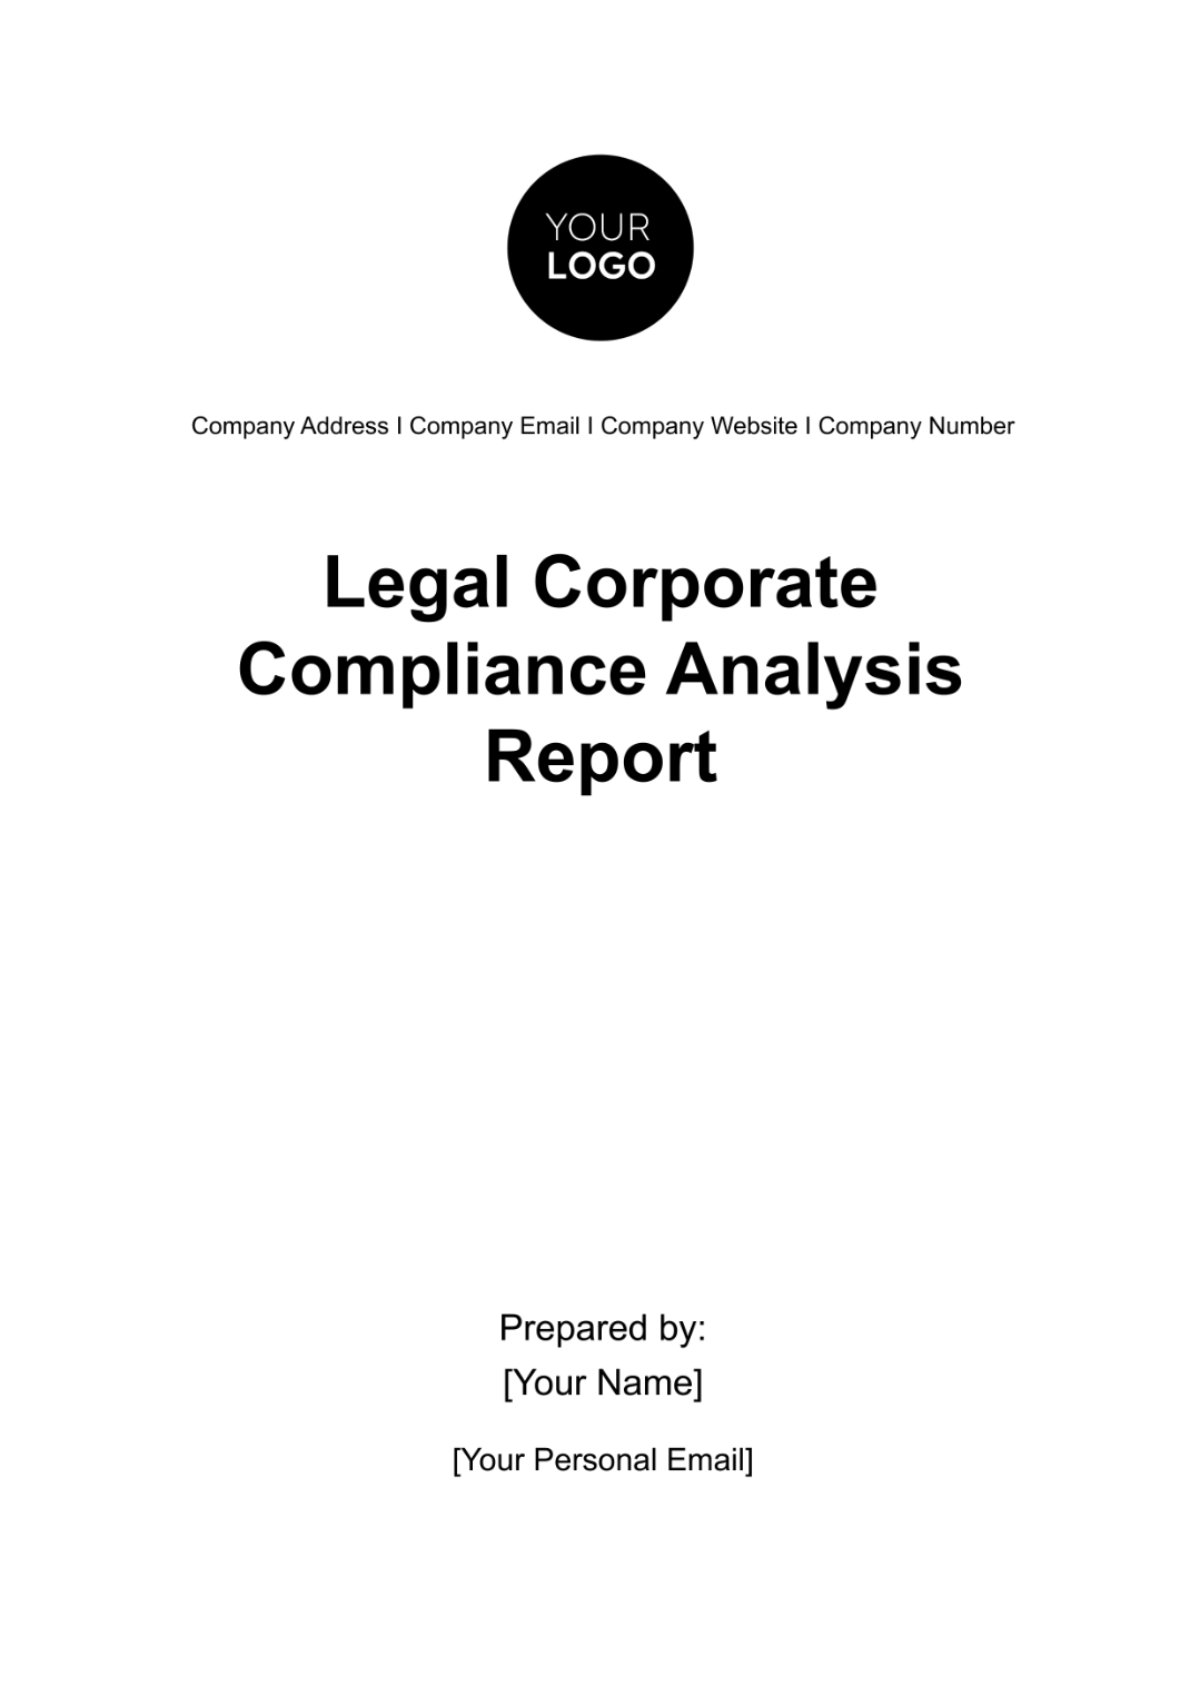 Legal Corporate Compliance Analysis Report Template